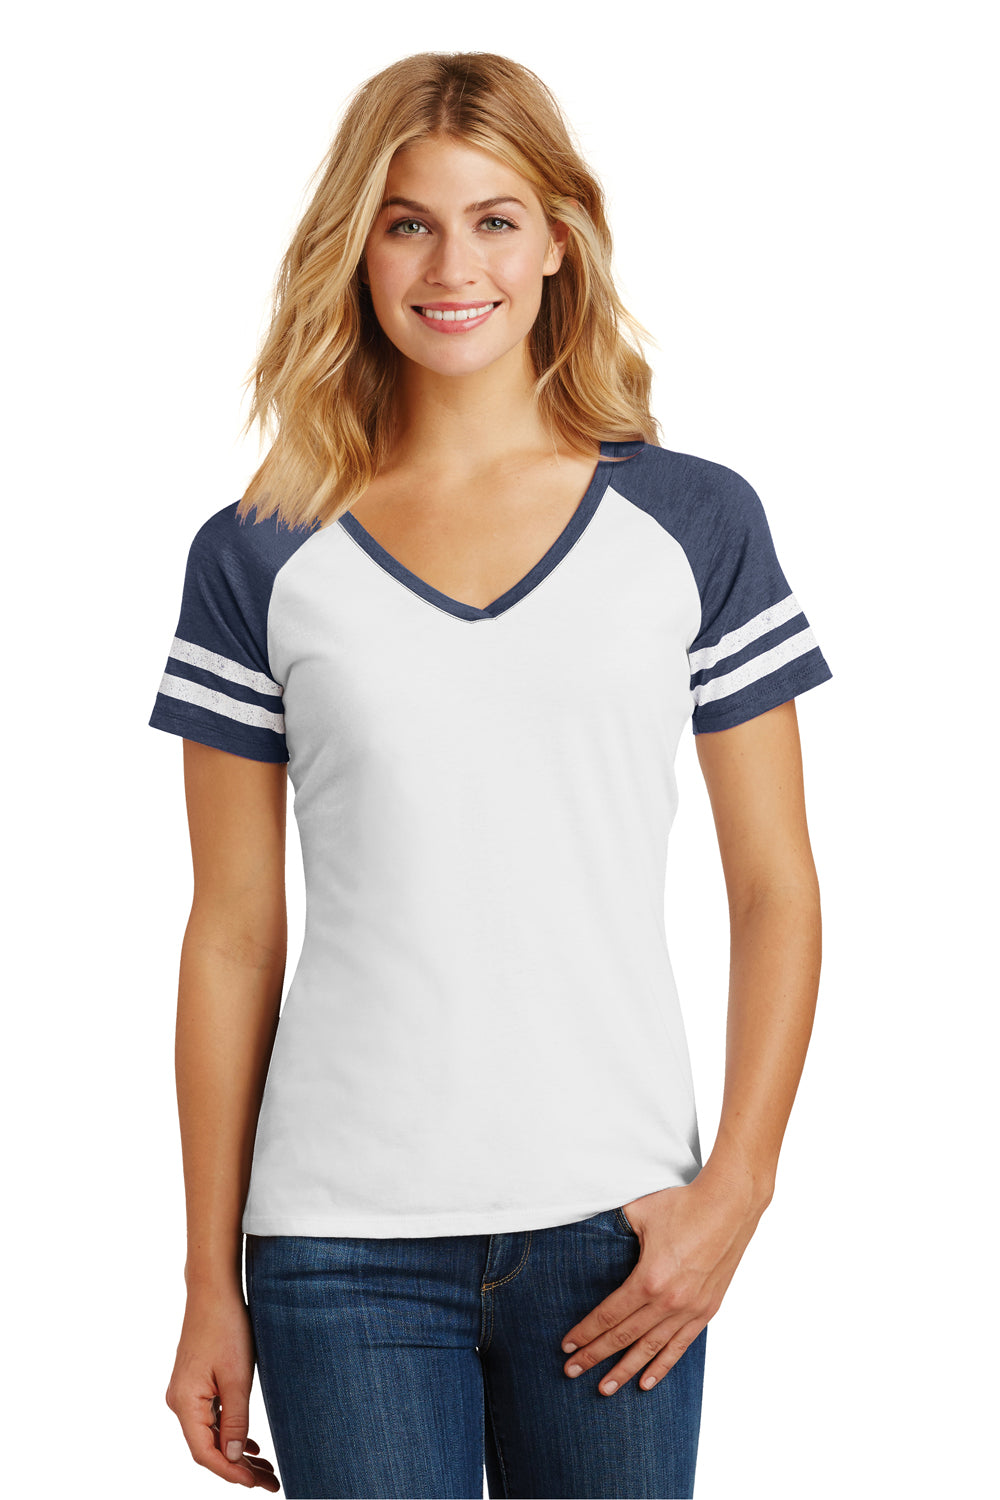 District DM476 Womens Game Short Sleeve V-Neck T-Shirt White/Heather Navy Blue Front